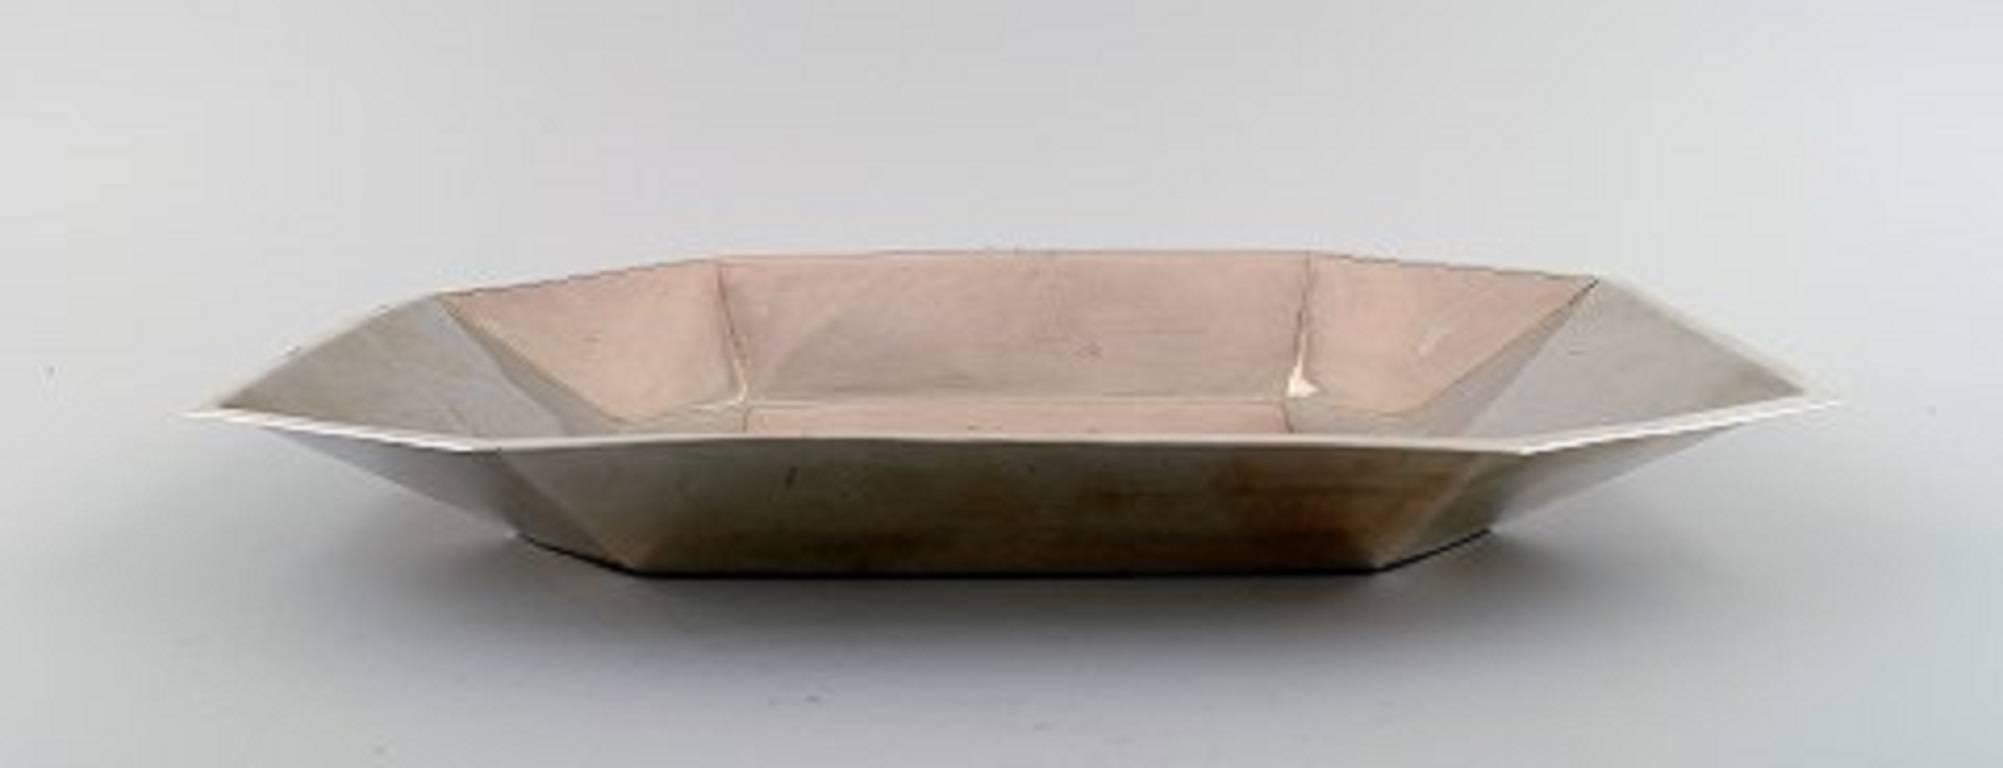 Large American dish / tray in silver.

Measures: 30 x 20 x 4 cm.

800 S. Weight 409 grams.

Stamped D 800.

In good condition.